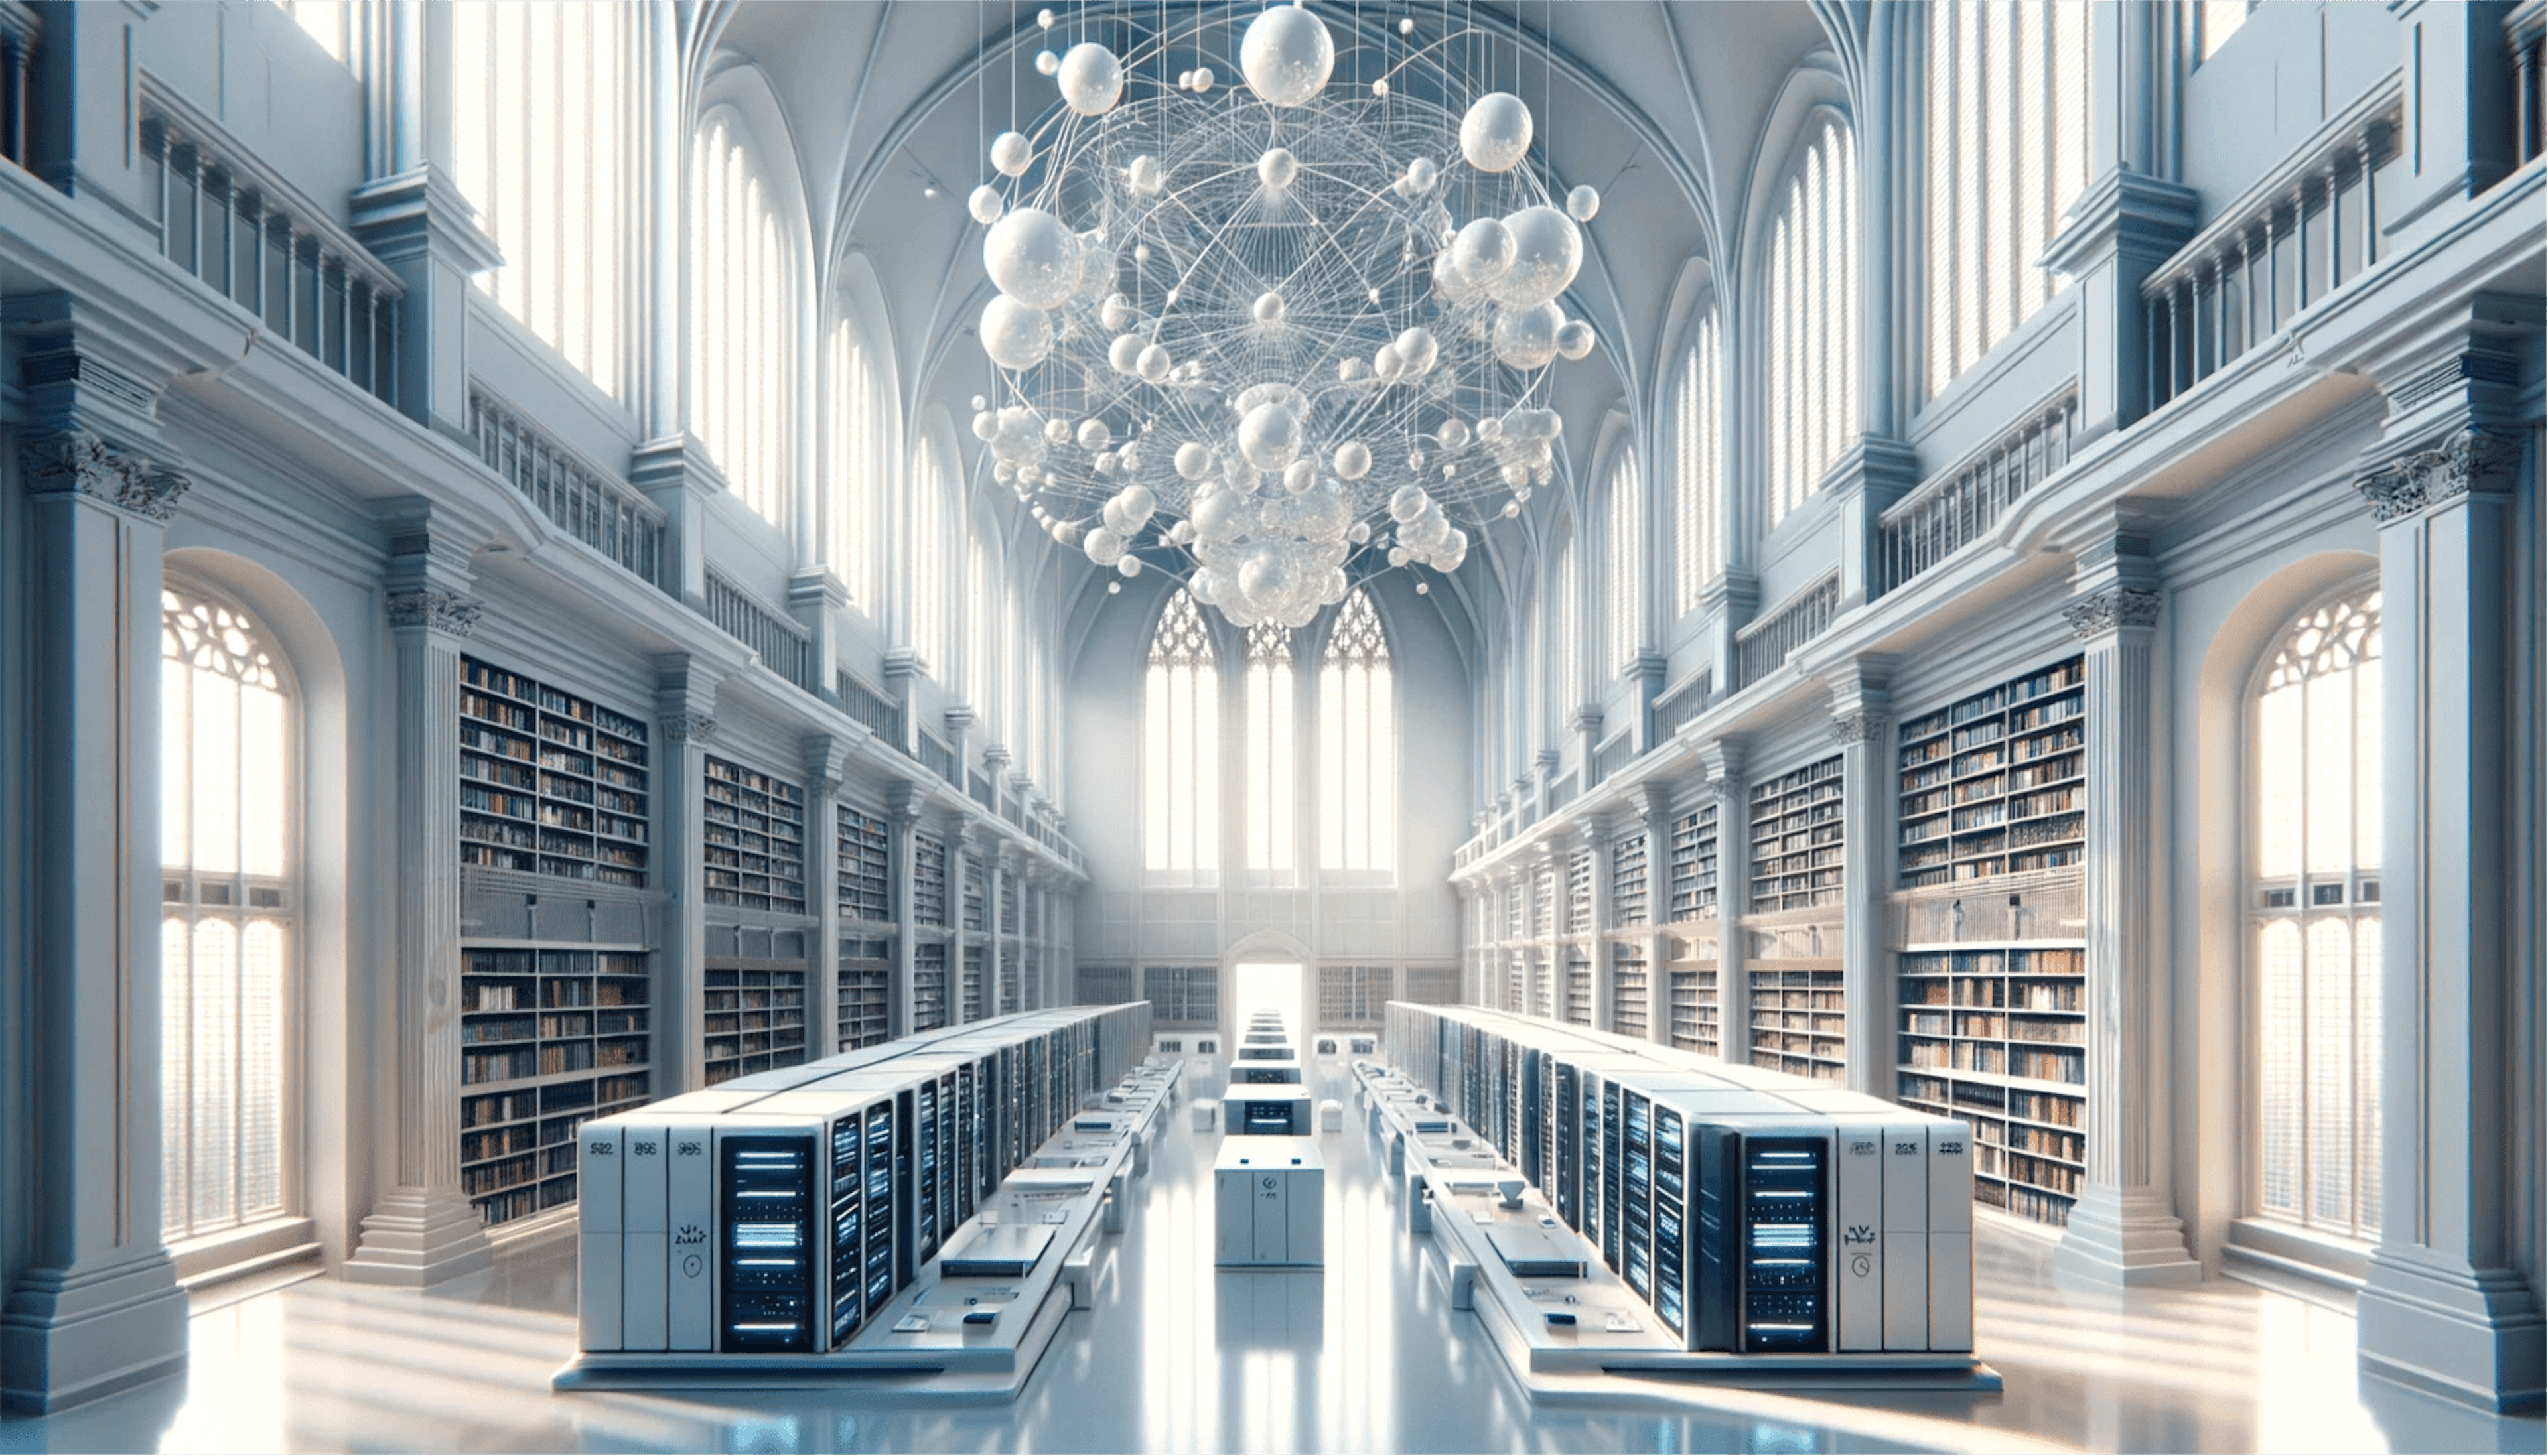 A grand library with modern server racks and a large network of spheres above, symbolizing data and technology.